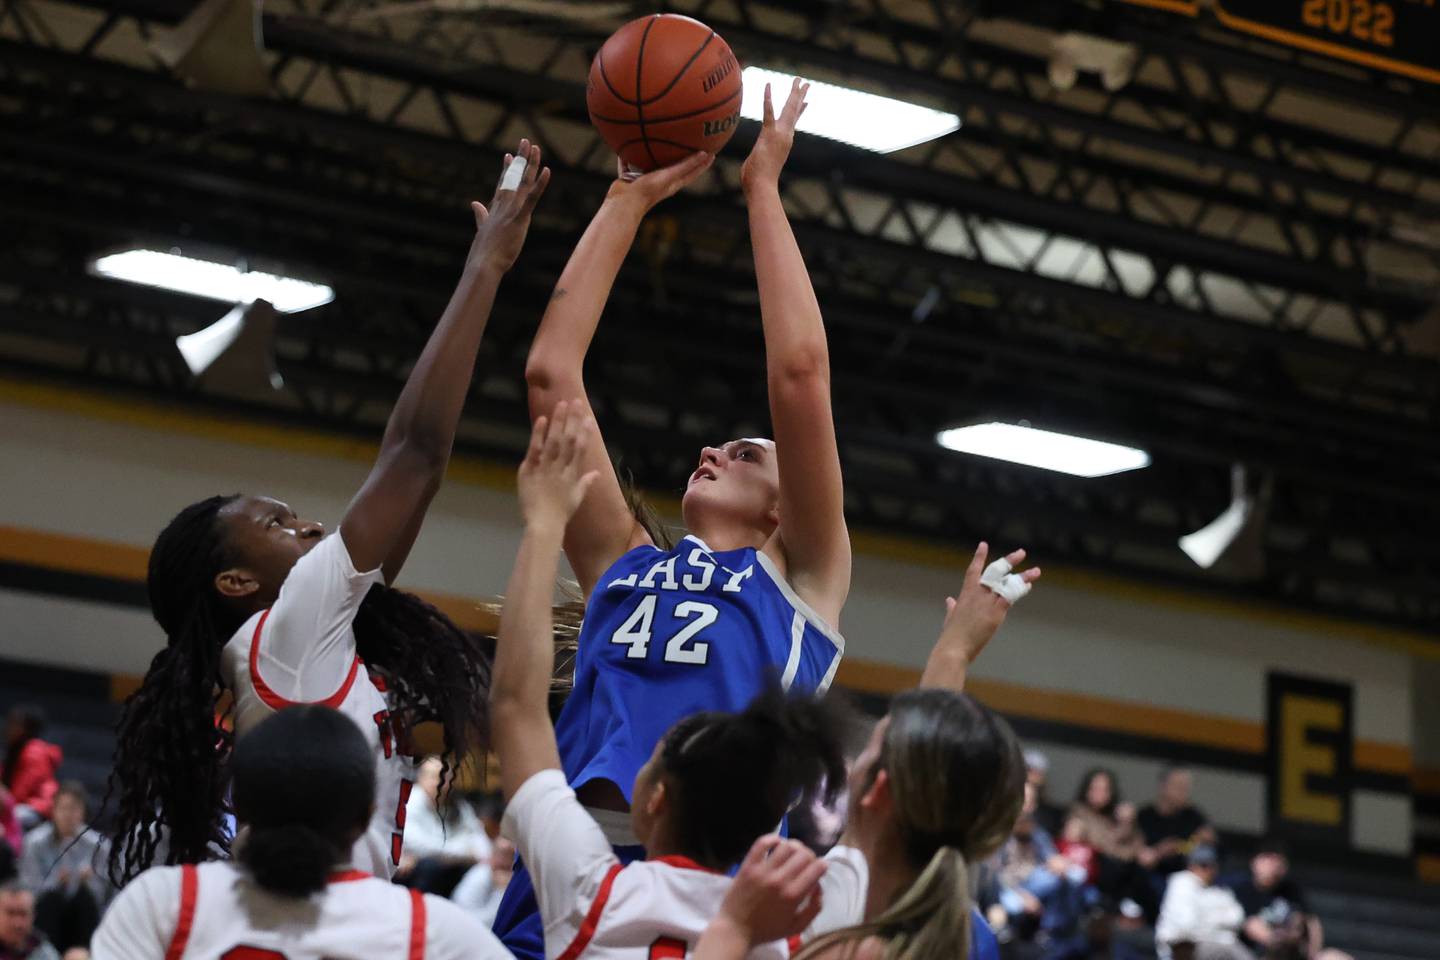 Lincoln-Way East’s Hayven Smith puts up a shot against Homewood-Flossmoor in the Class 4A Joliet West Sectional championship on Thursday, Feb. 22nd in Joliet.